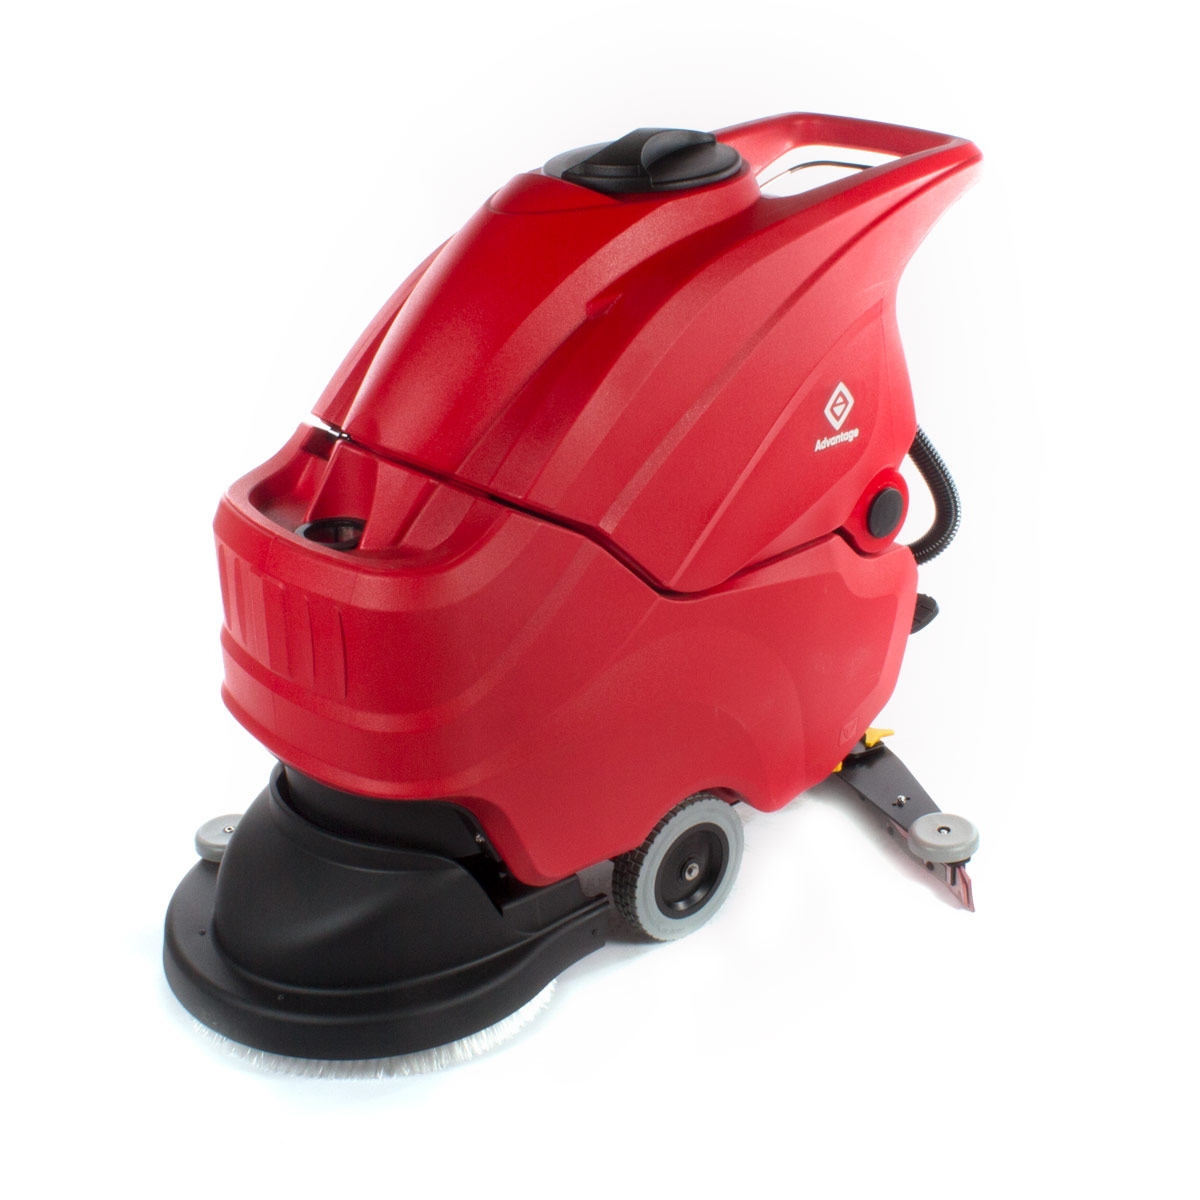 20" Red Automatic Floor Scrubber (Battery Powered) w/ Scrub Brush - 15 Gallons